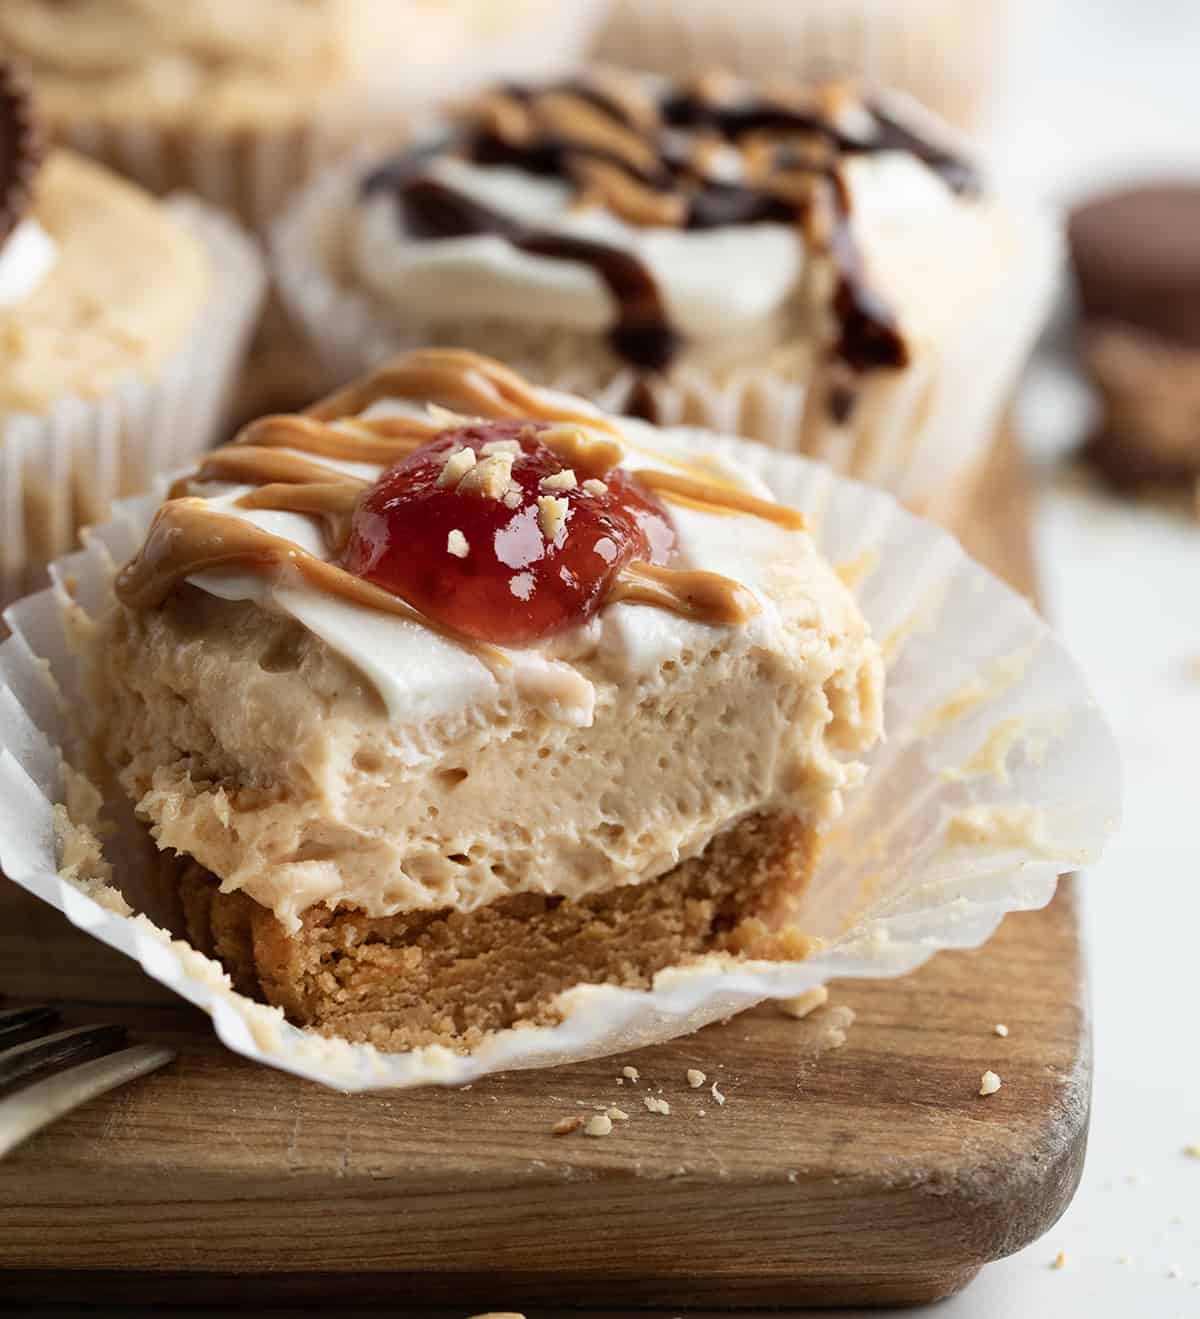 One Mini Peanut Butter Cheesecakes cut in half showing texture.